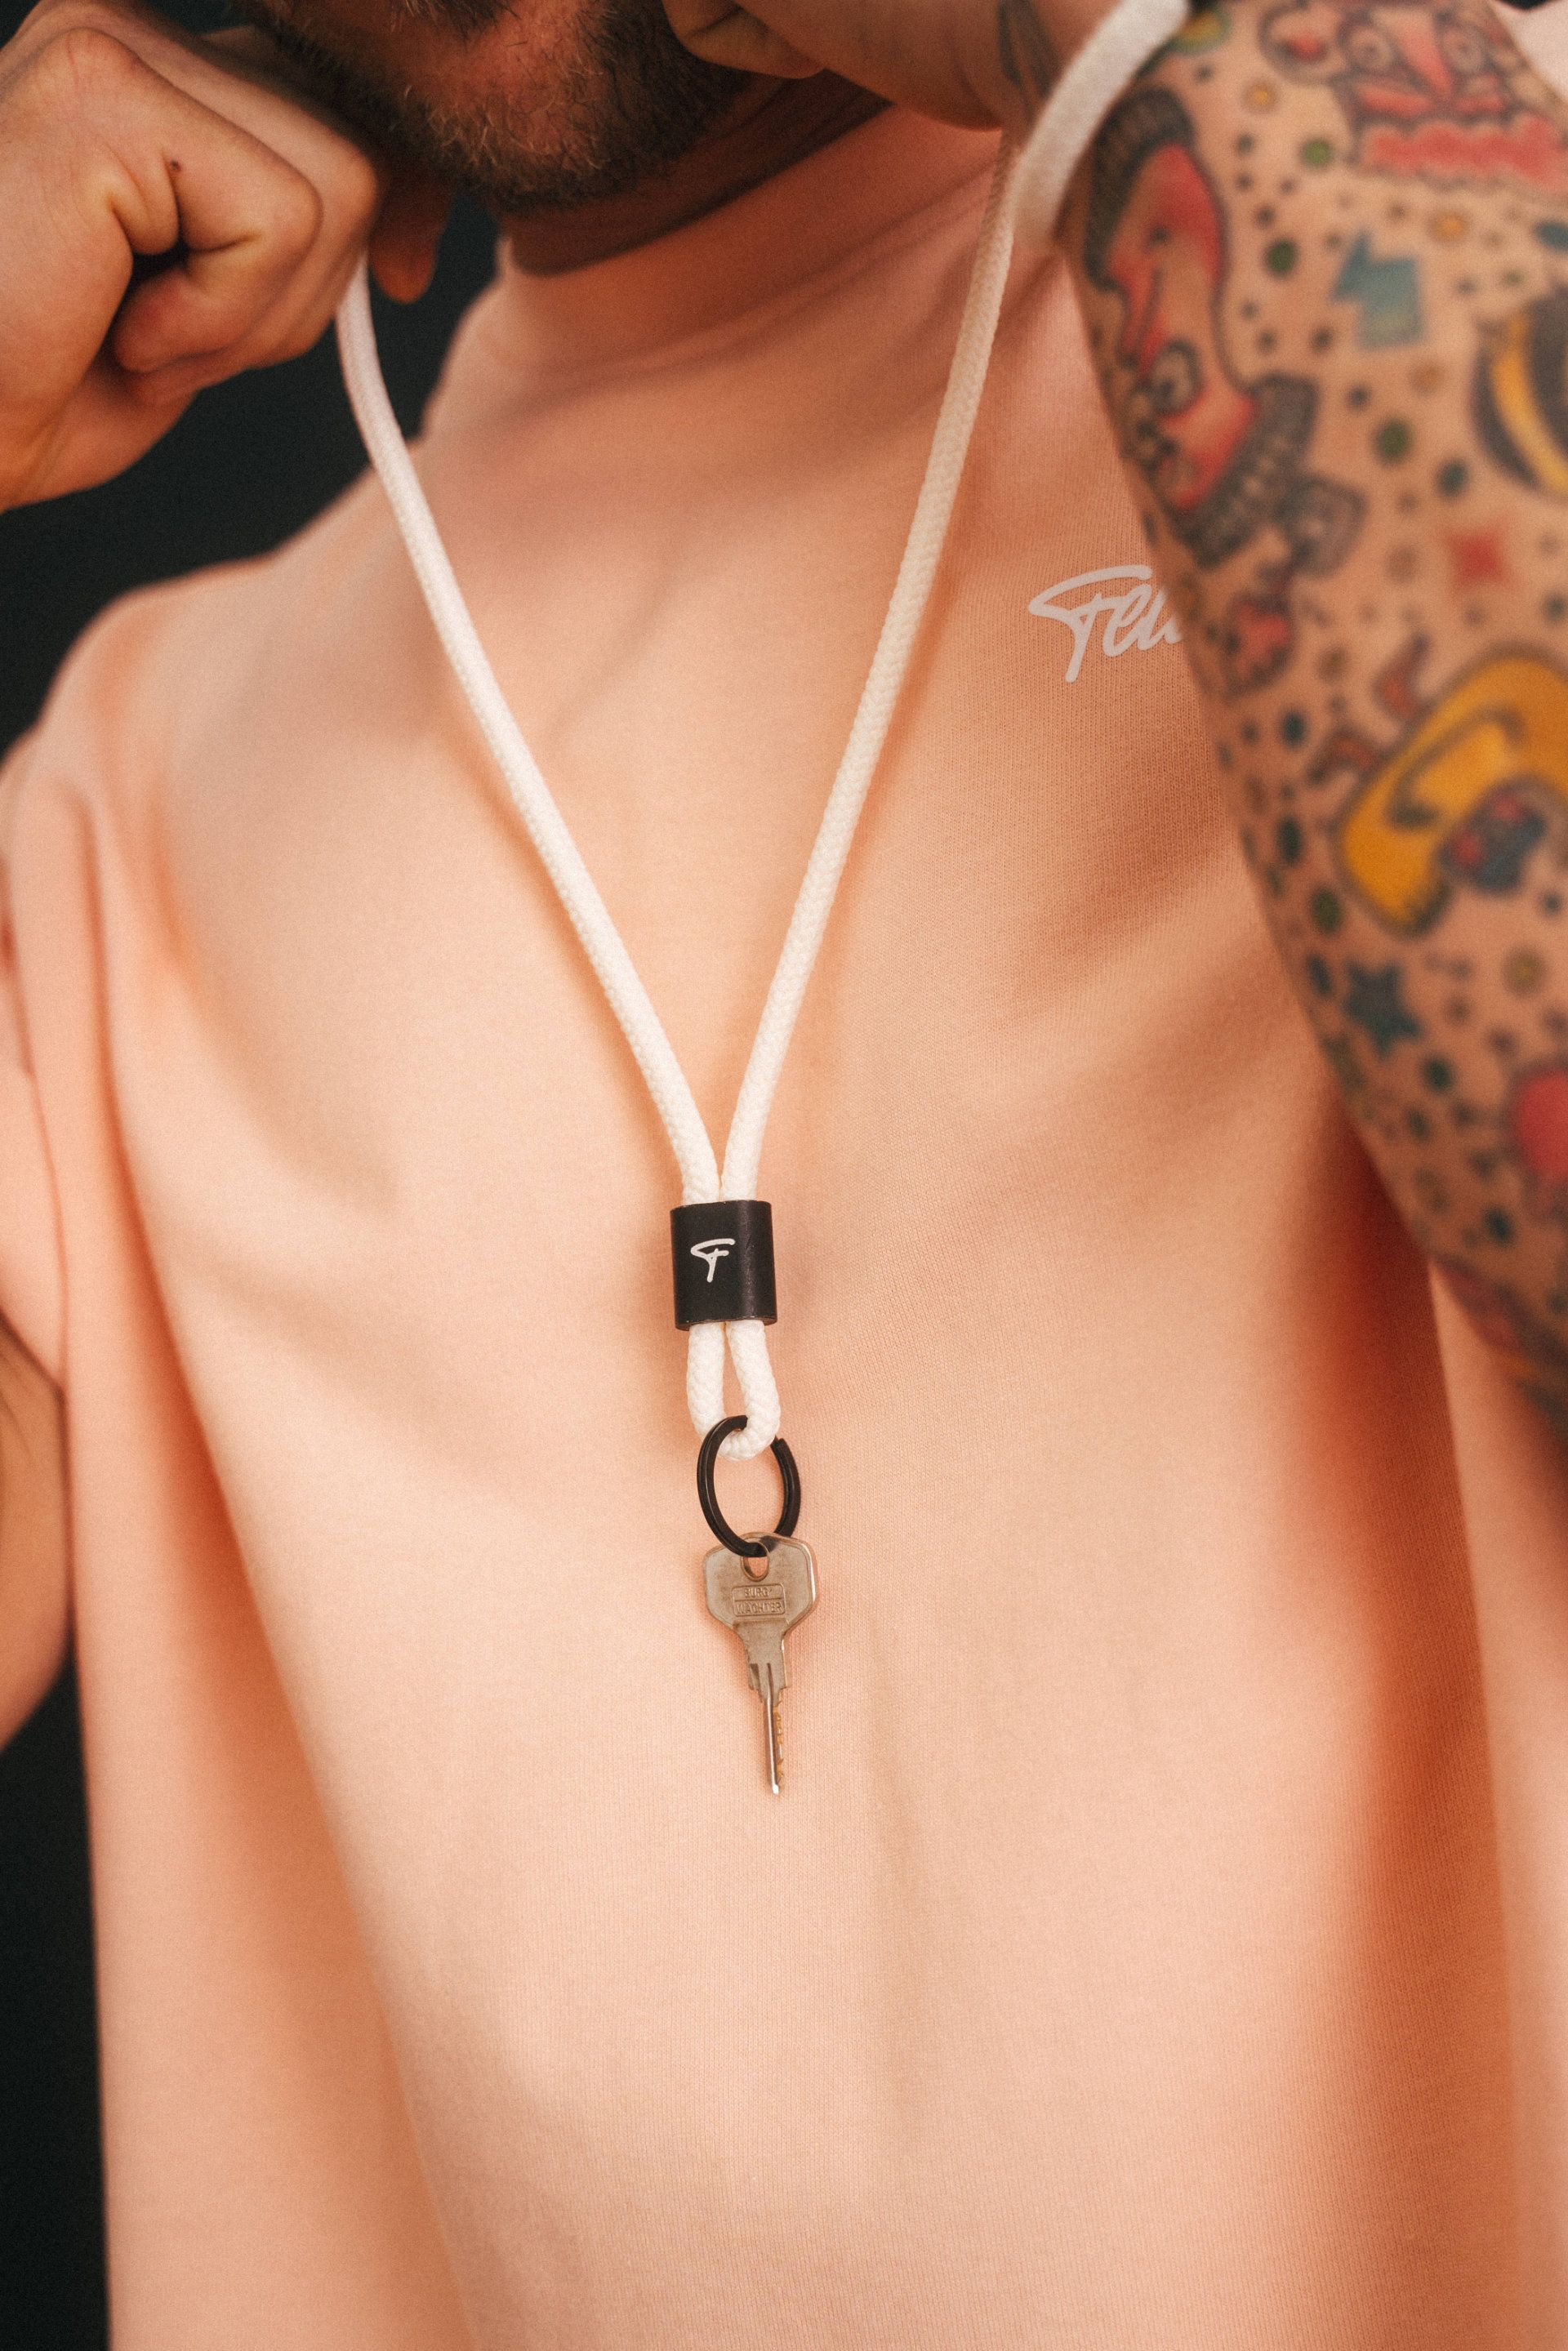 A person with tattooed arms, wearing a pastel-coloured shirt, holding a pipe in his mouth and hanging a key from a ribbon around his neck, perfectly photographed by an Aschaffenburg photographer